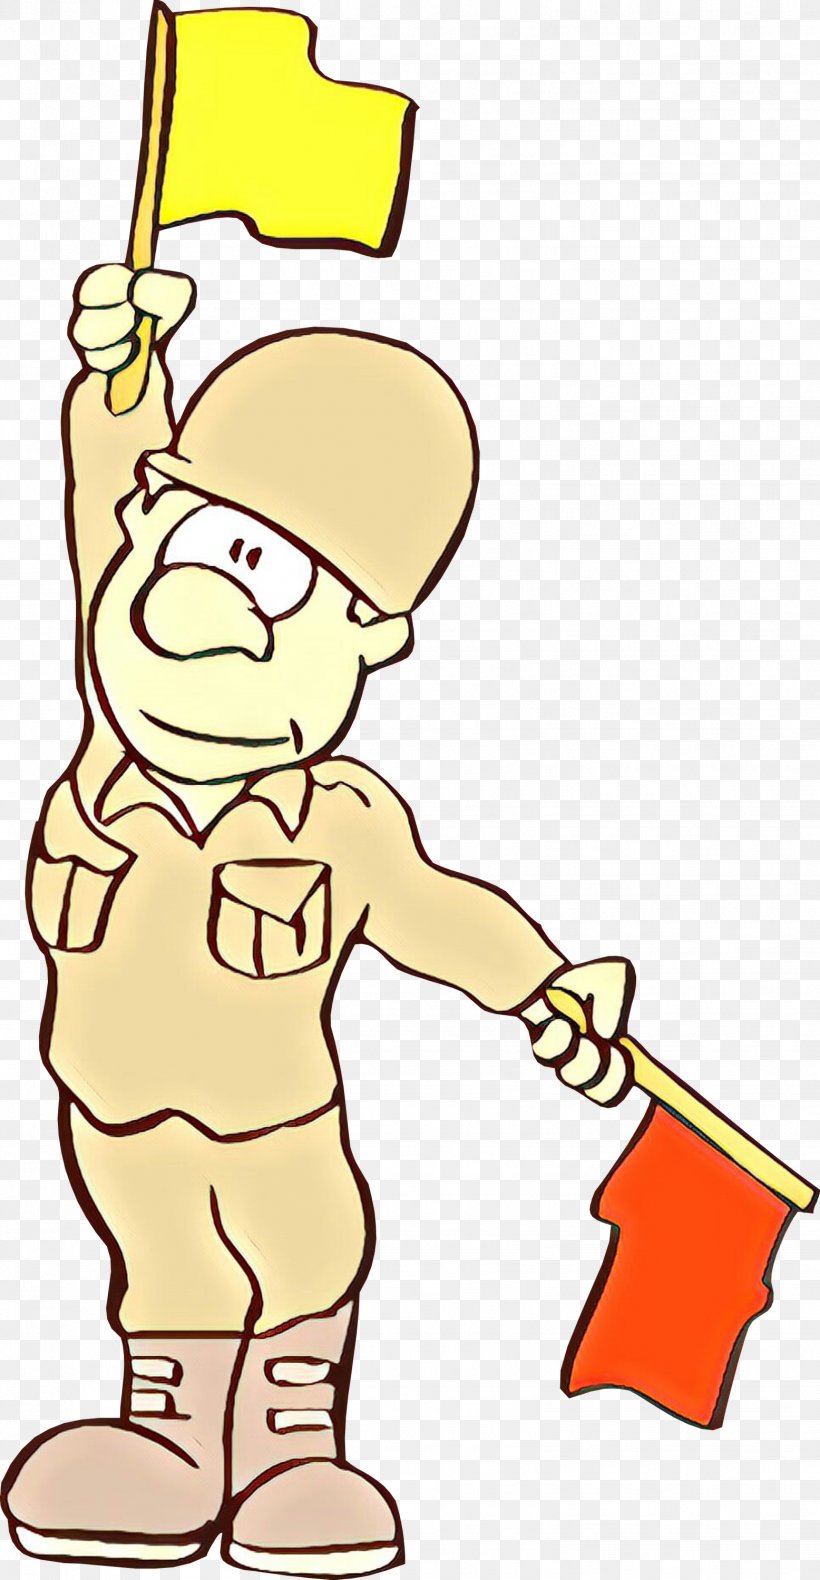 Clip Art Soldier Military Cartoon, PNG, 1556x2999px, Soldier, Animation, Art, Cartoon, Character Download Free